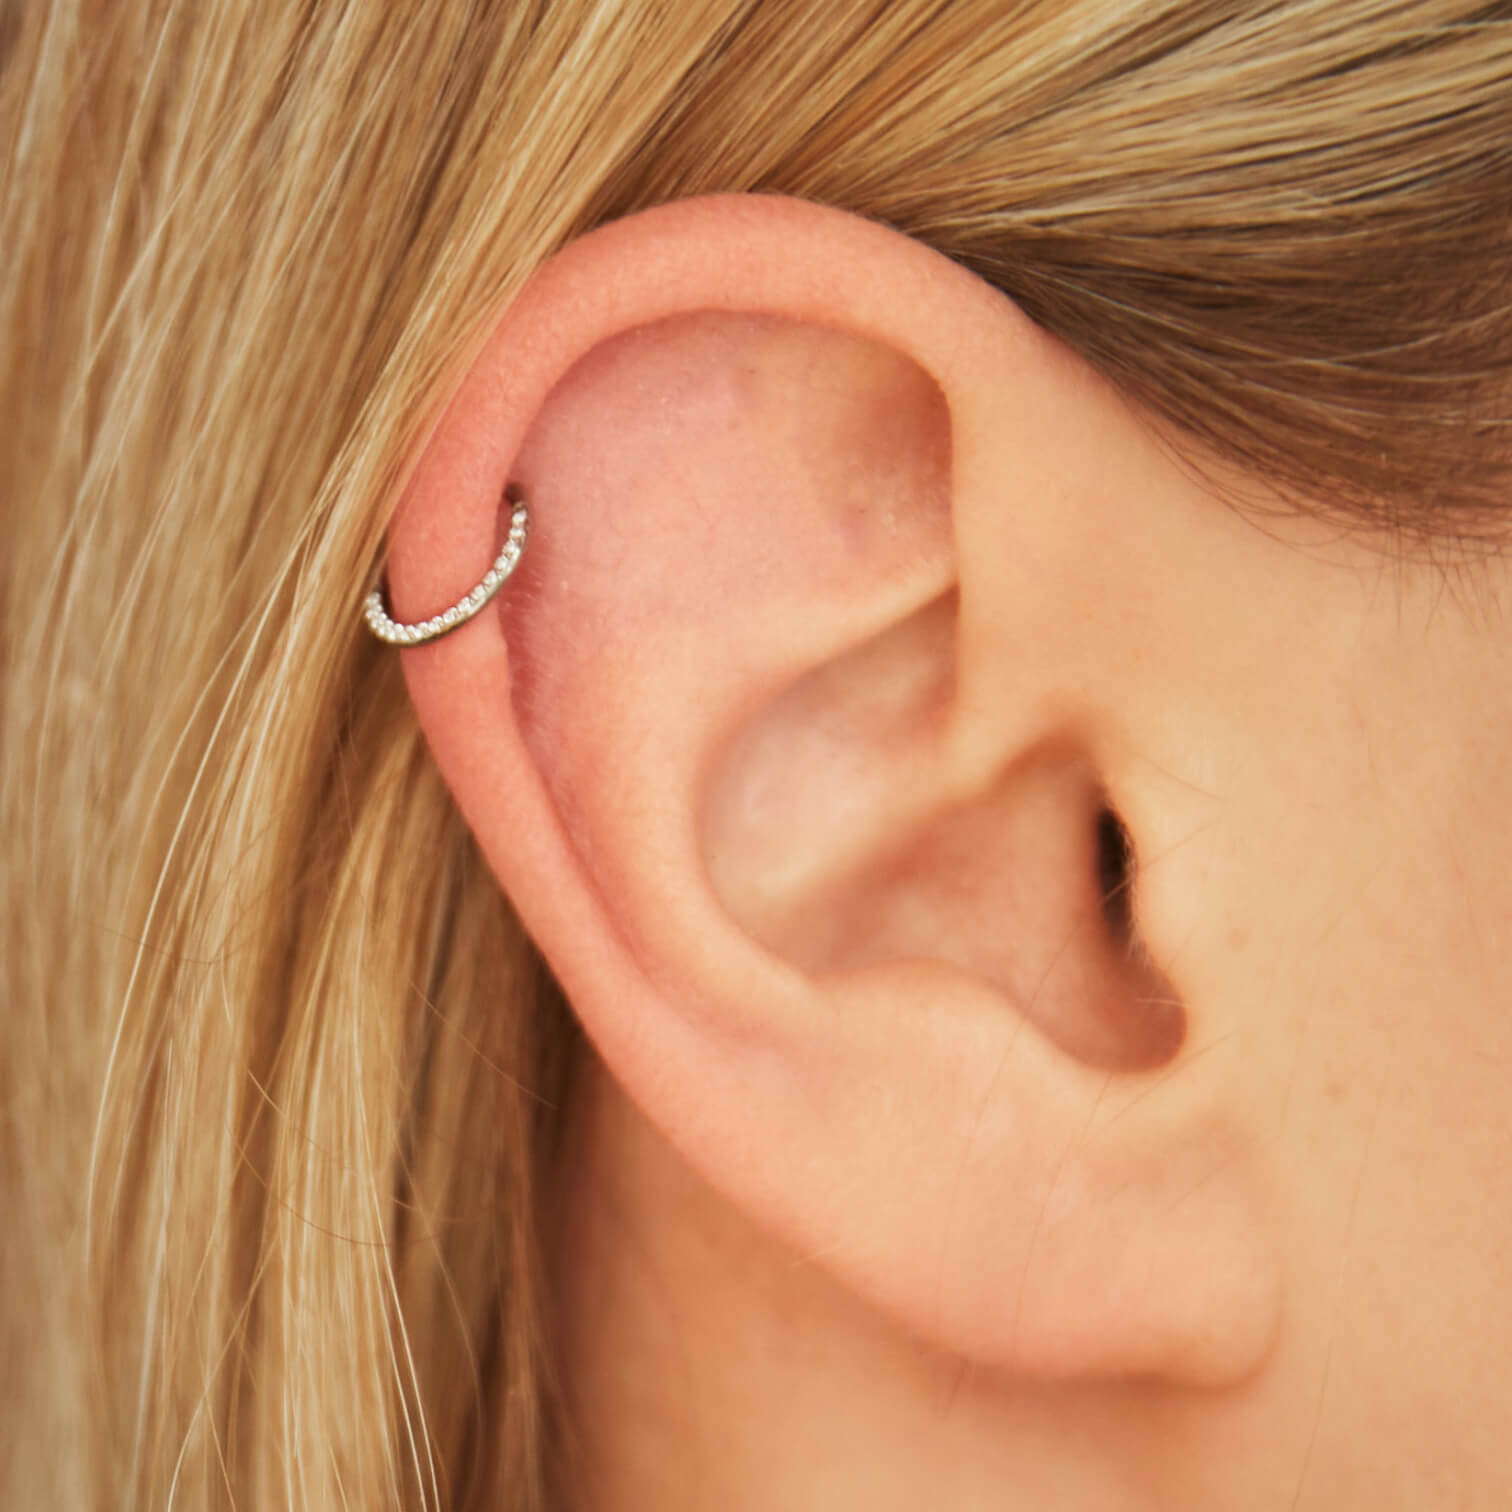 A Guide to Helix Piercings